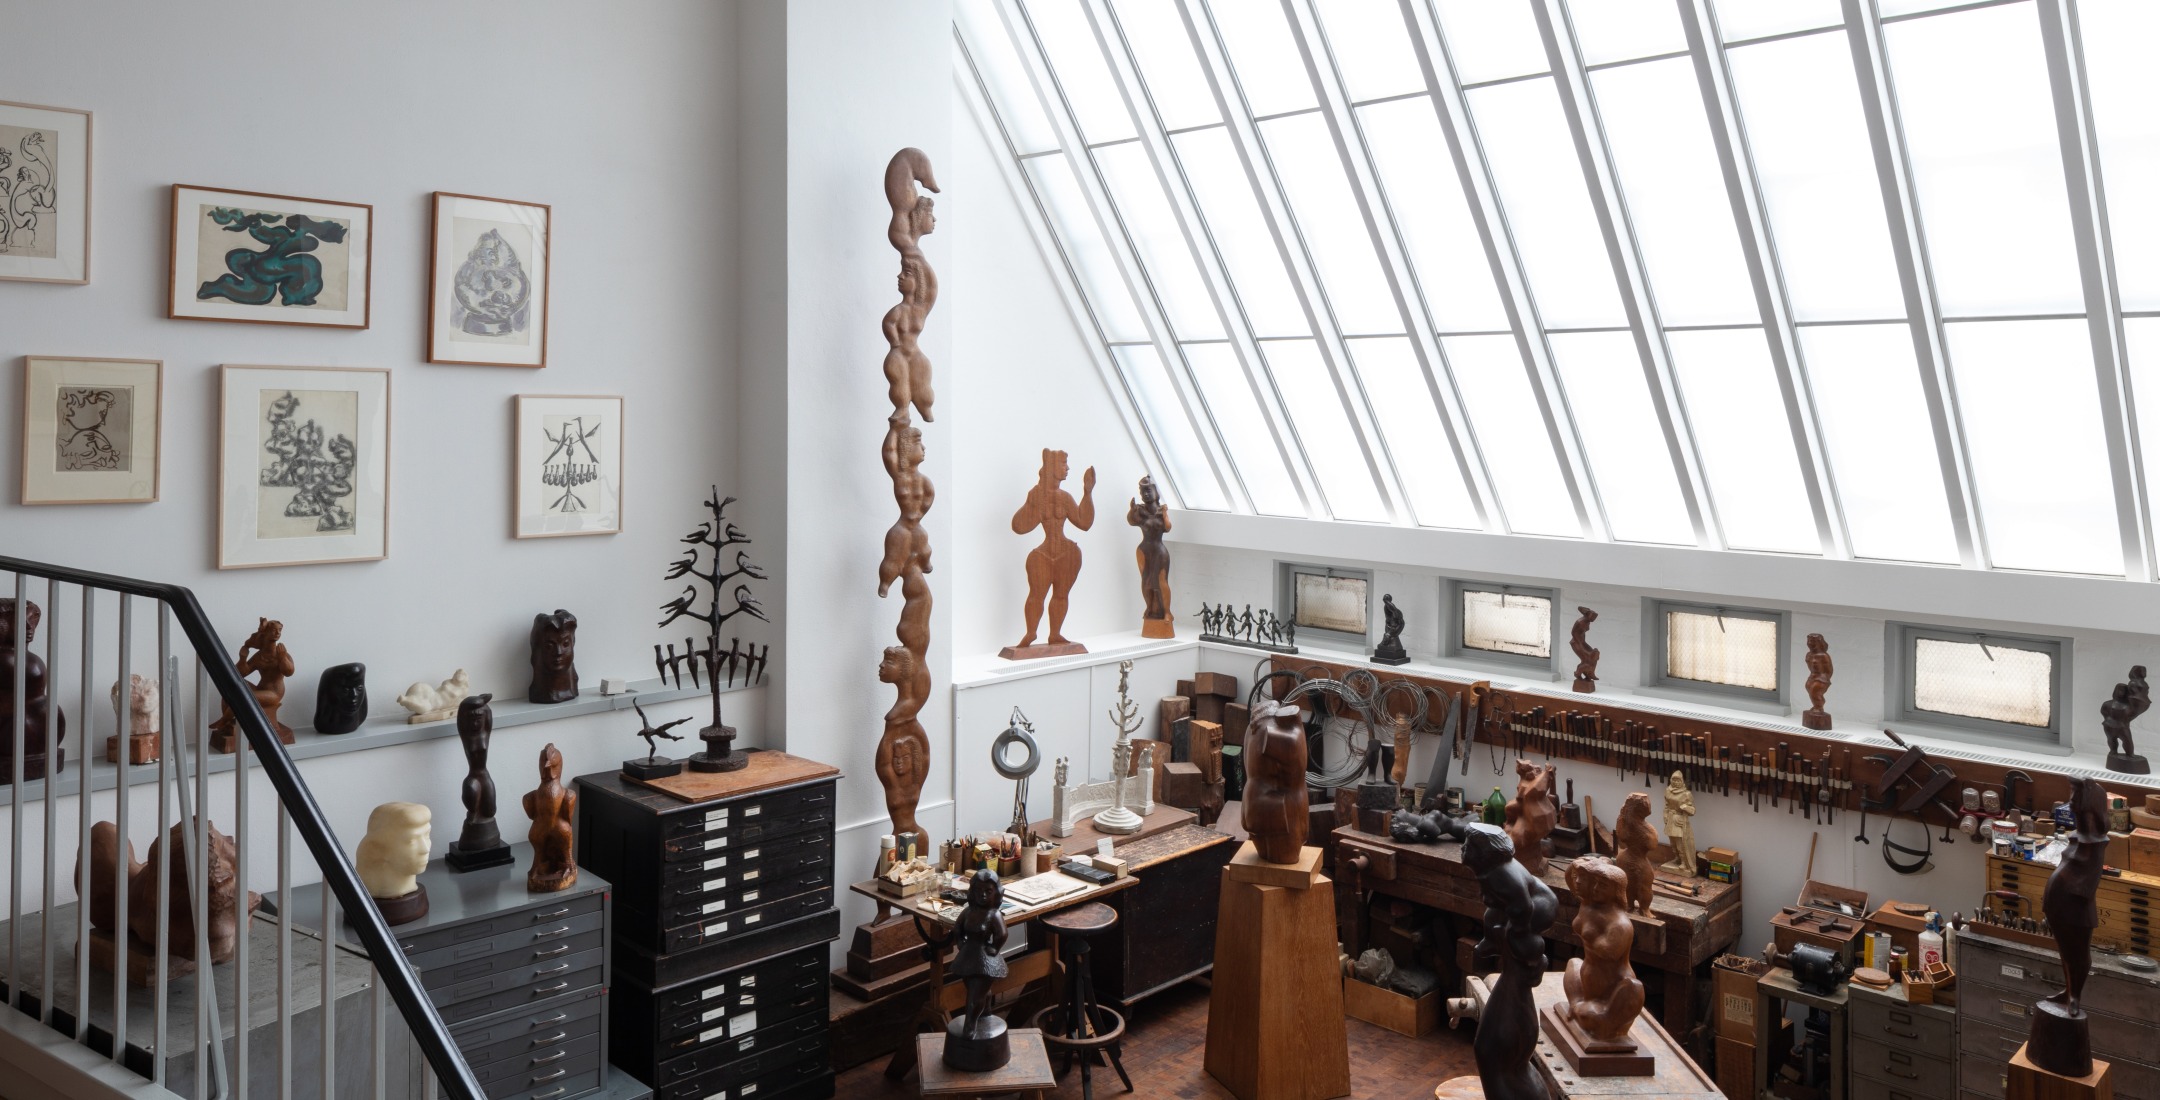 Photo of the studio at 526 LaGuardia Place. There is a skylight along the right half of the space that floods the sculptures, tools, and materials with light. There are drawings on the wall and many sculptures of human figures in wood.